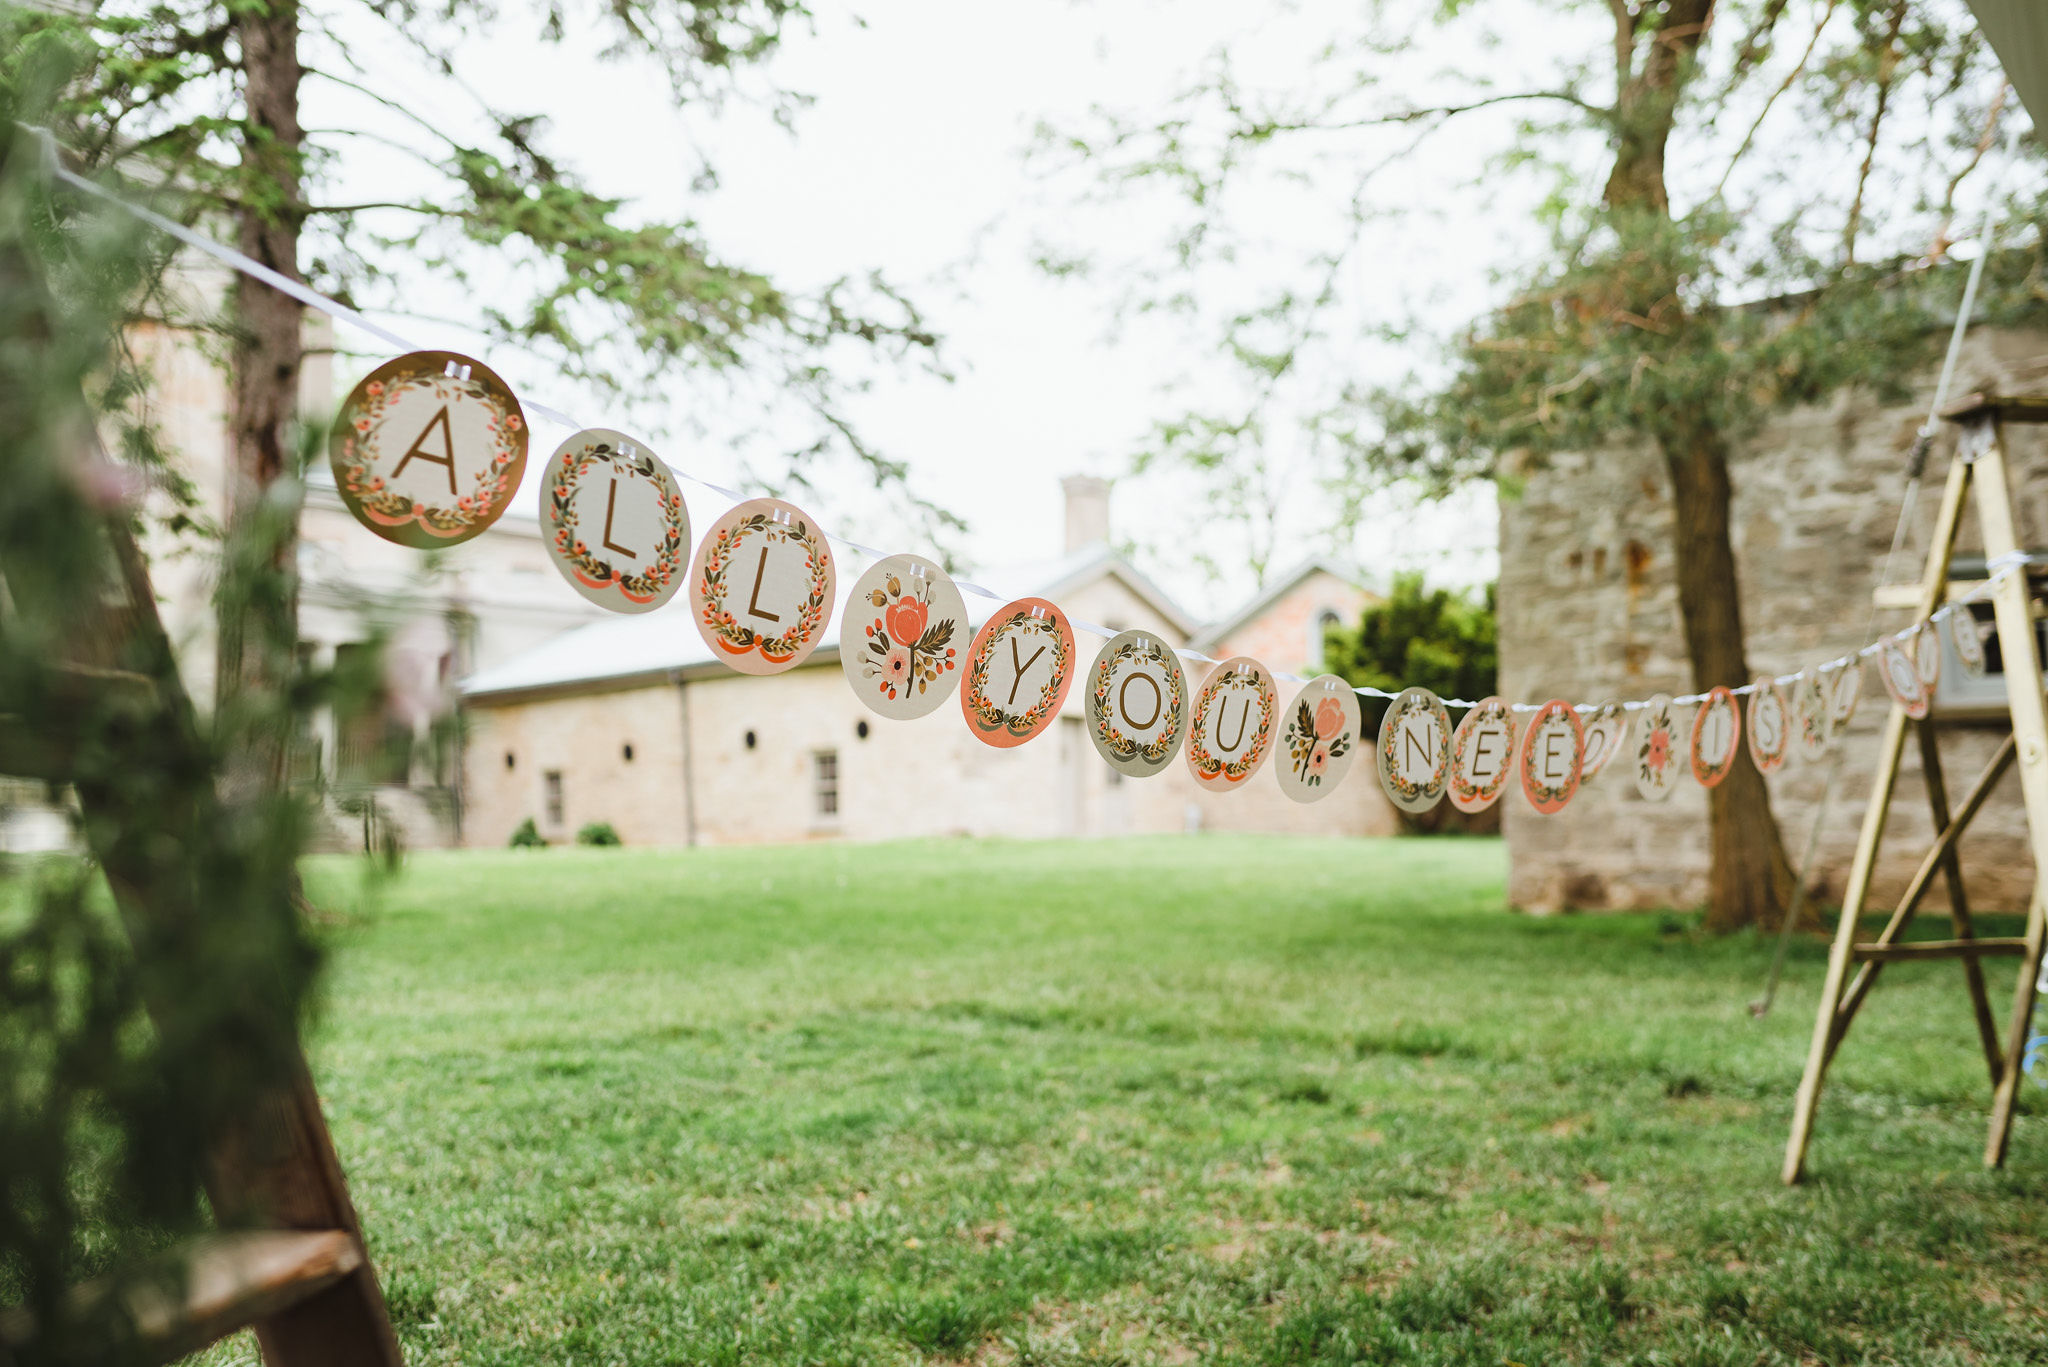 Paper circles strung up saying "ALL YOU NEED IS LOVE" outside Ruthven Park National Historic Site during a charming southern style wedding